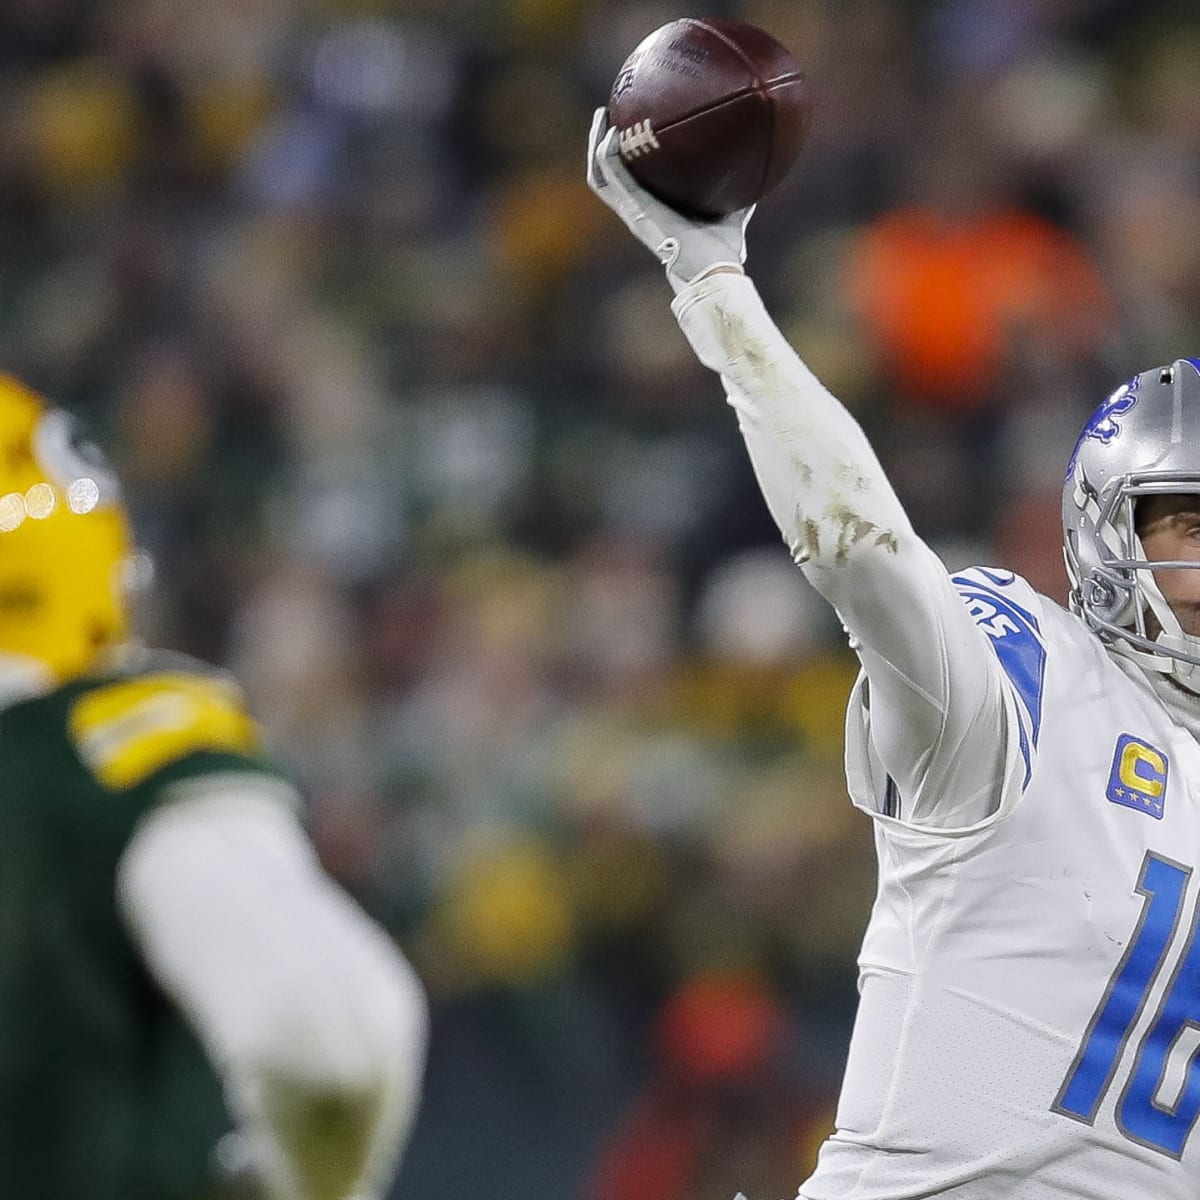 How to Watch Packers vs. Lions: Time, Channel, Streaming Options